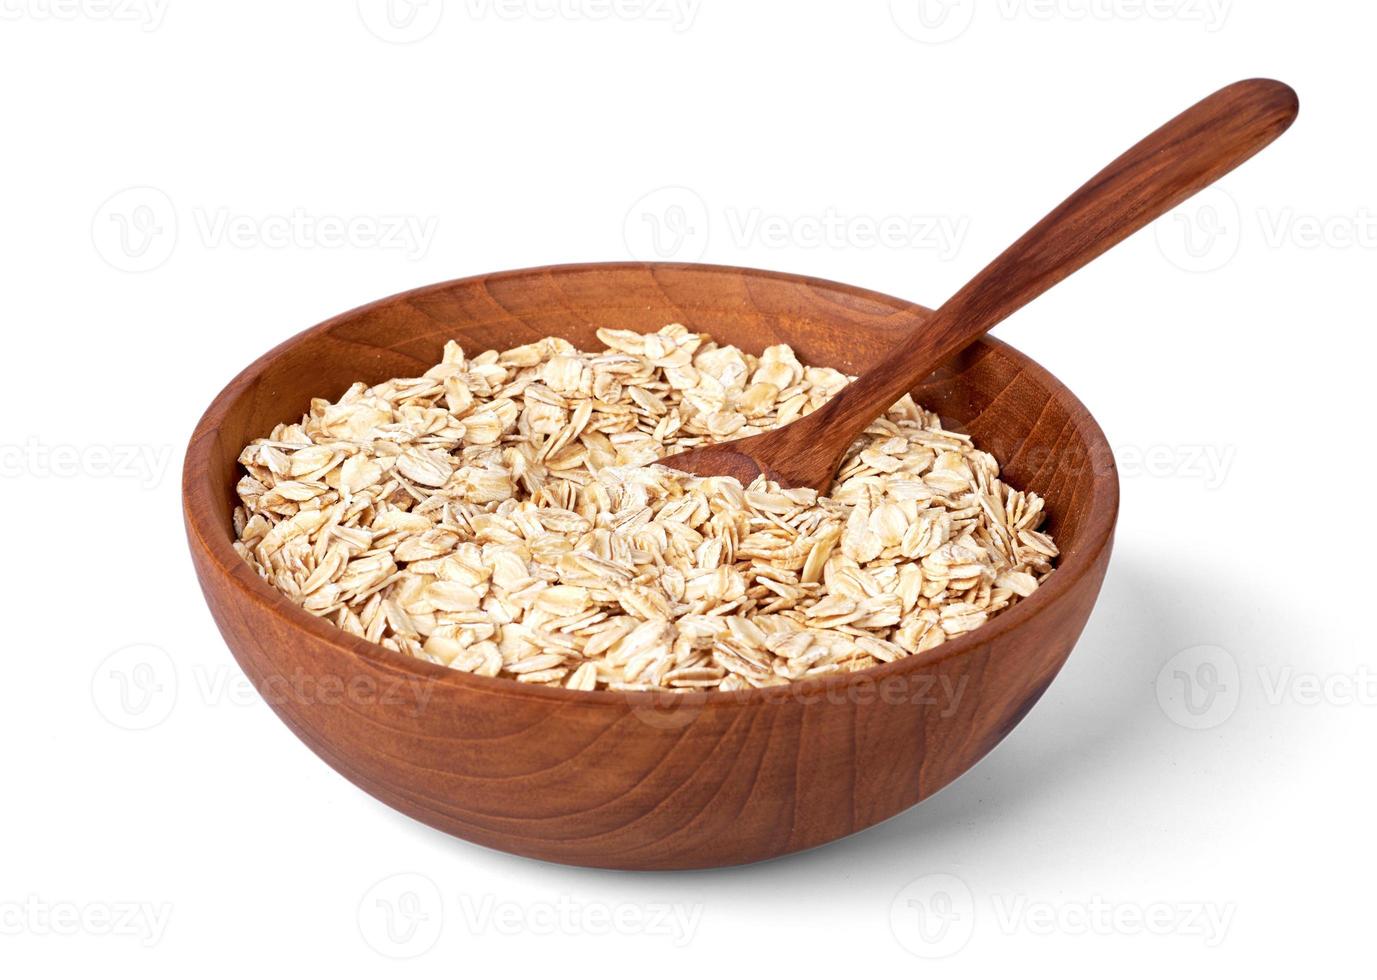 Rolled oats or oat flakes in bowl with wooden spoon isolated on white background with clipping path photo